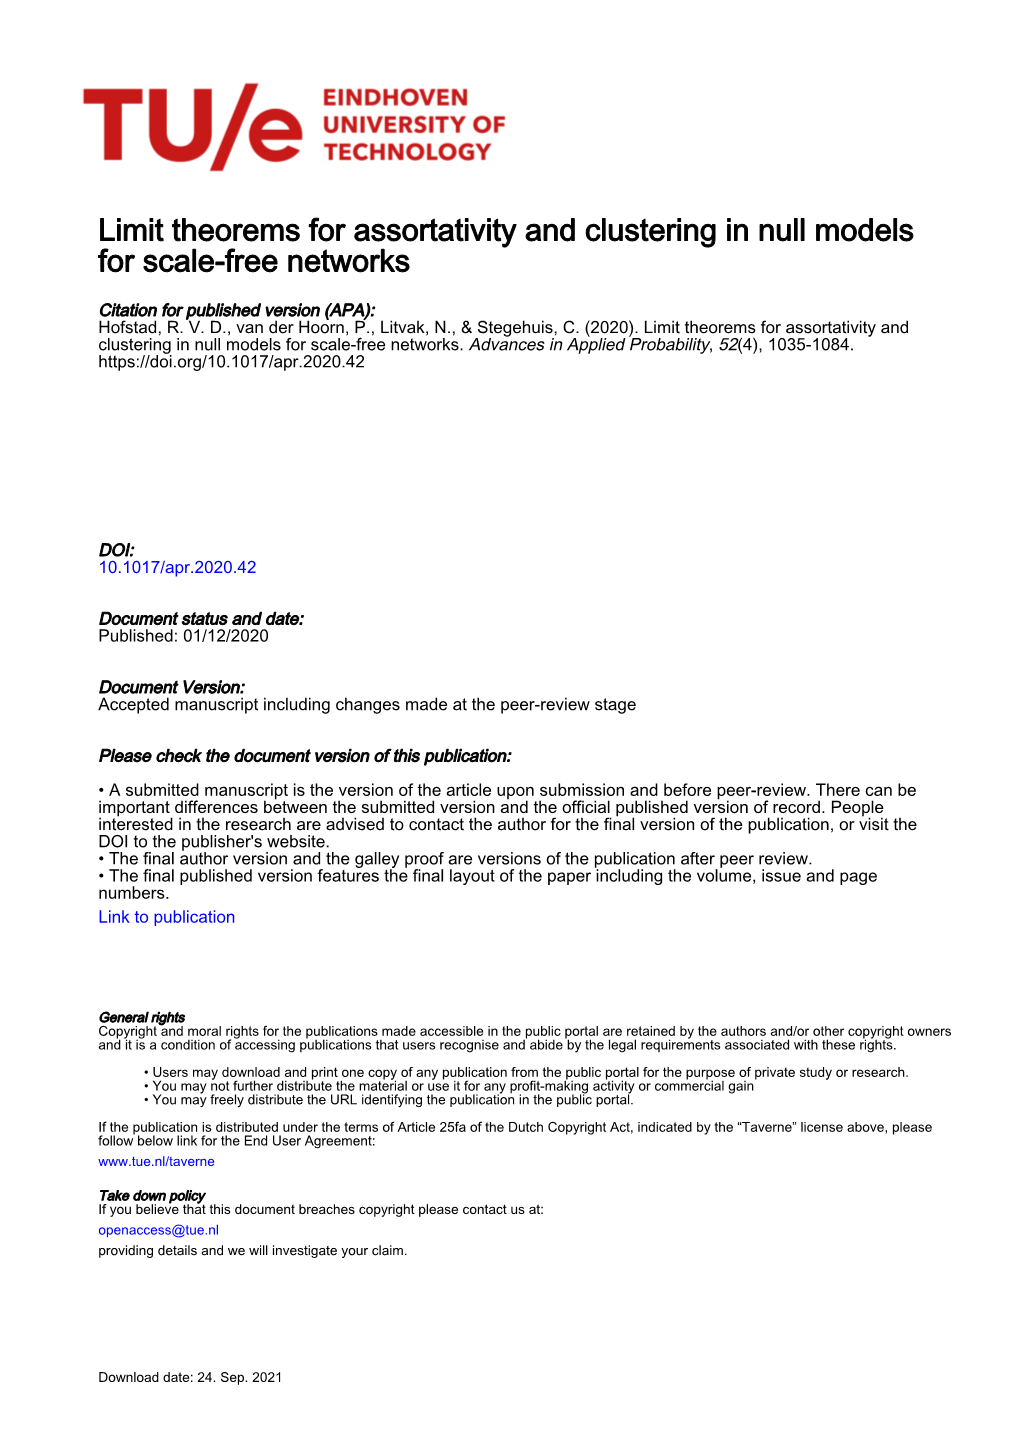 Limit Theorems for Assortativity and Clustering in Null Models for Scale-Free Networks